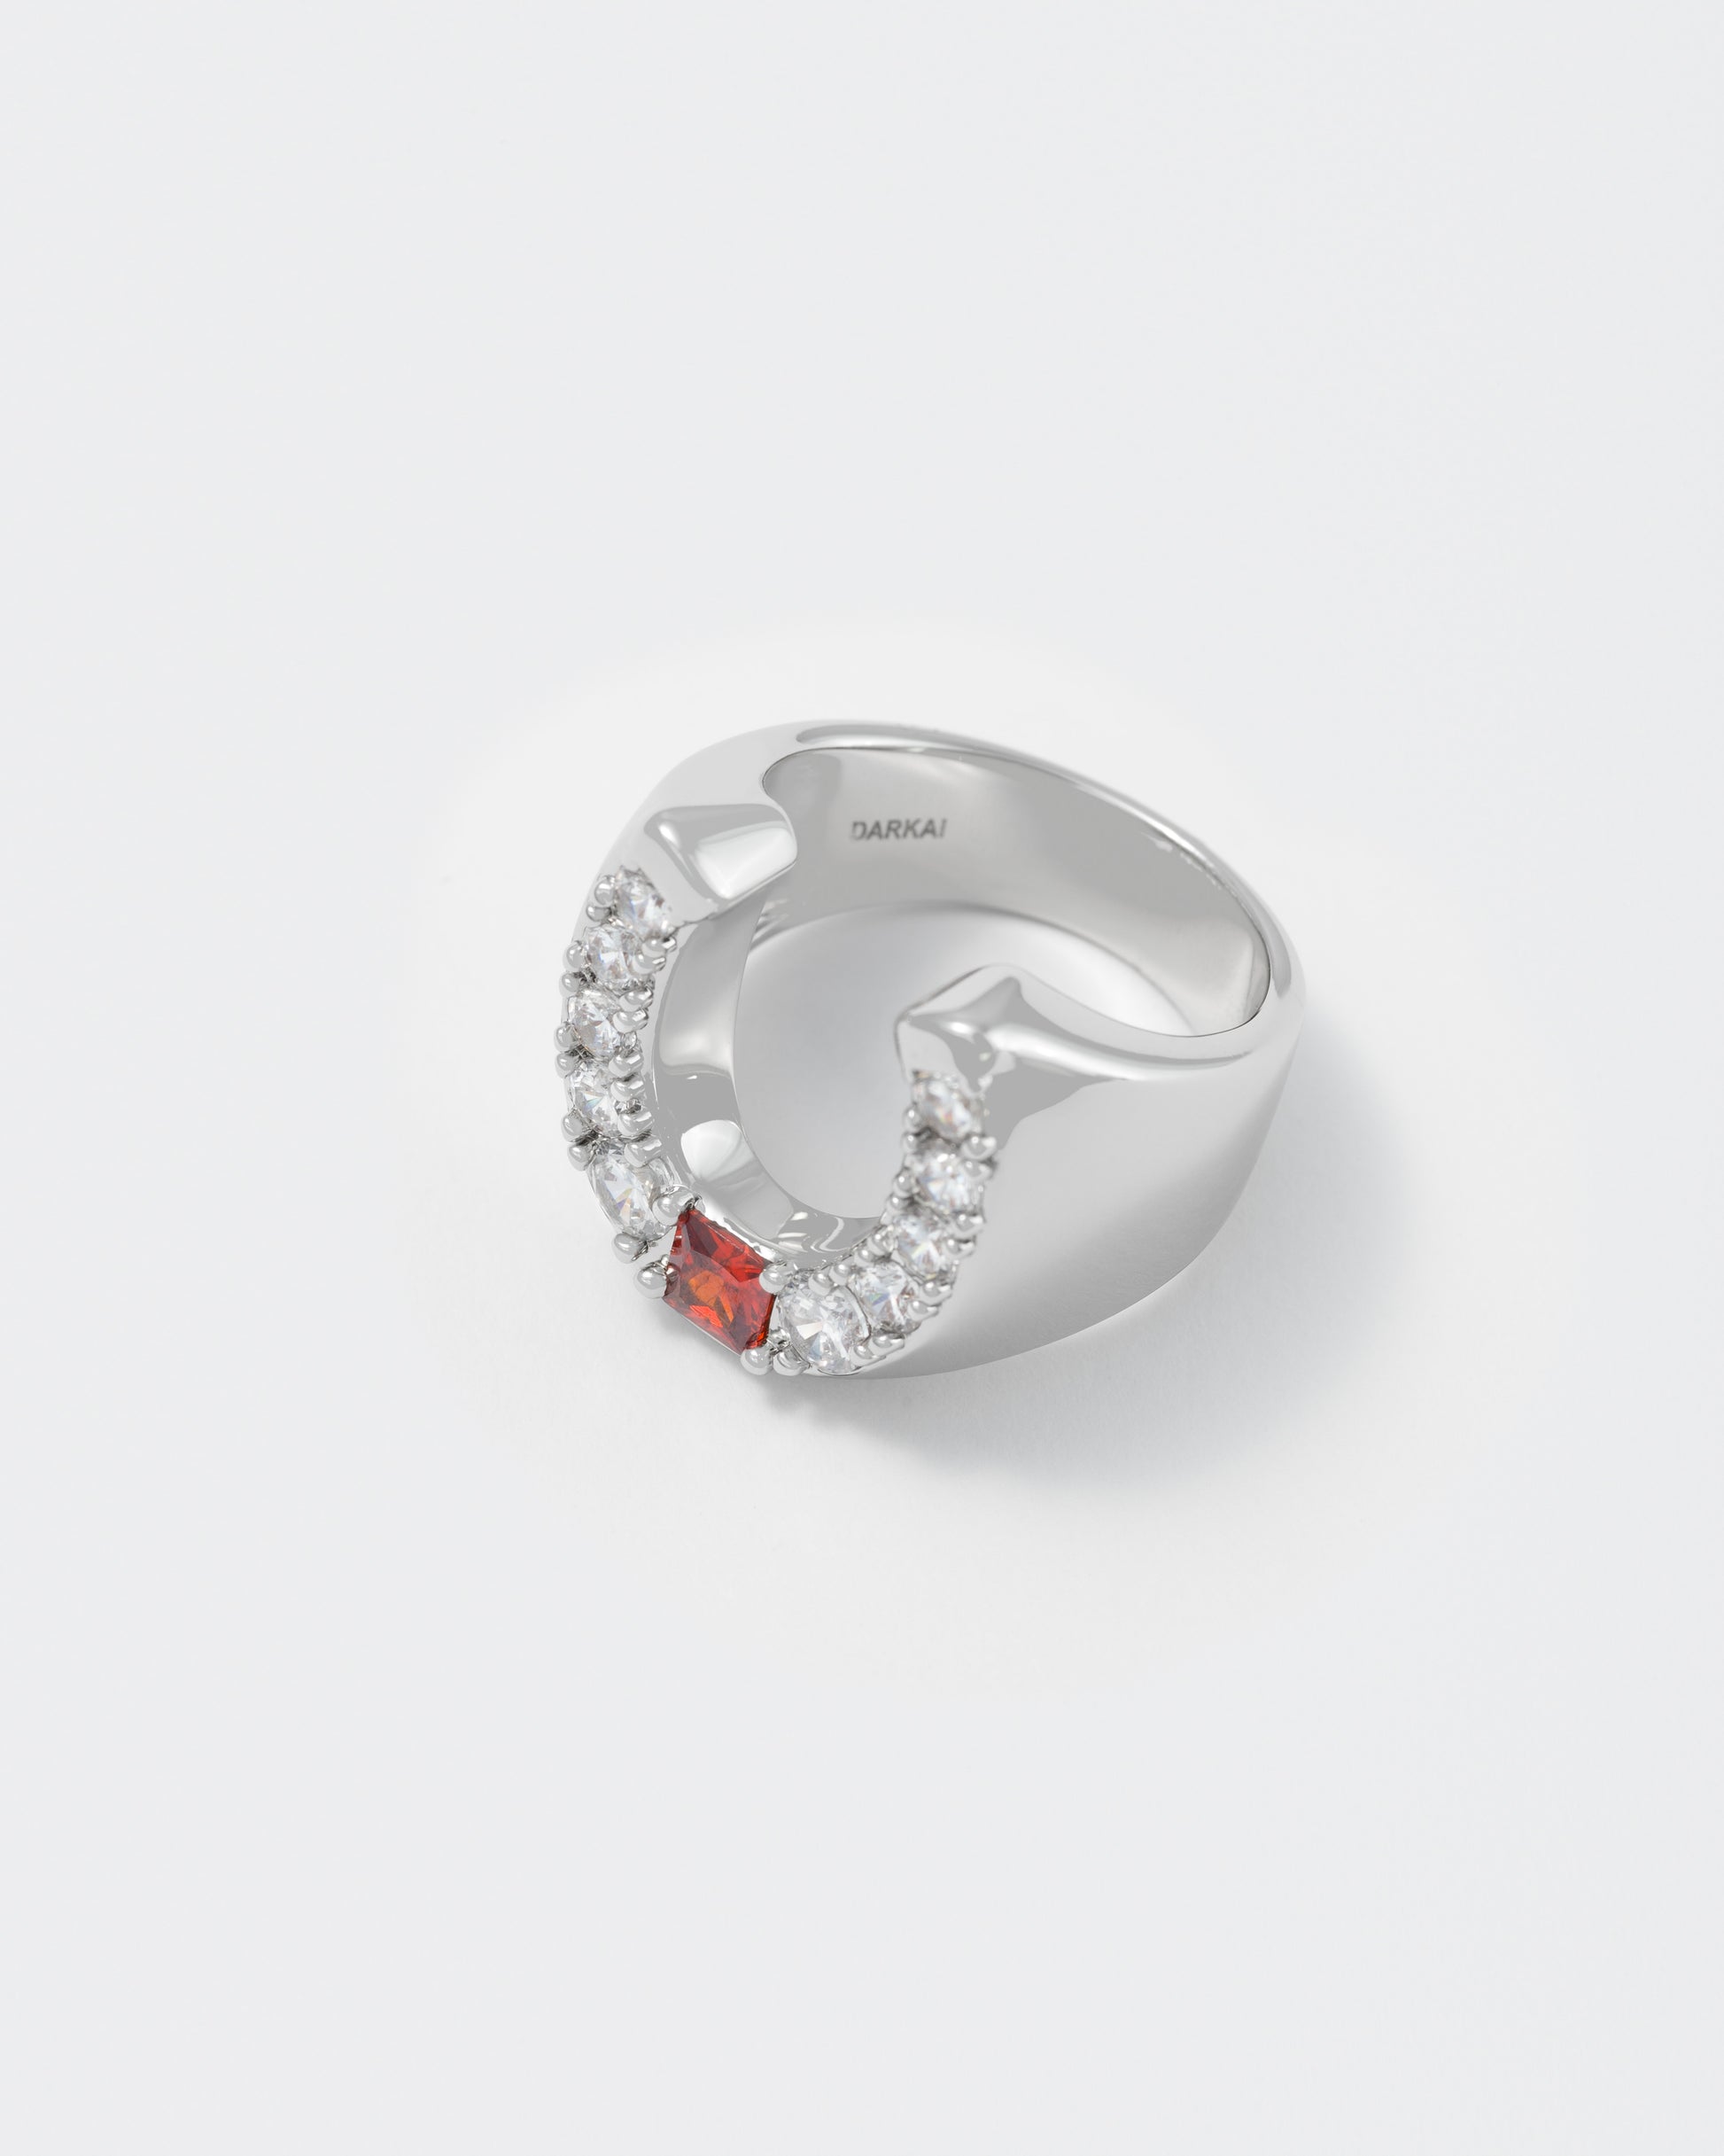 detail of horseshoe ring with 18kt white gold coating and round shaped brilliant-cut diamond white stones with central princess-cut garnet stone